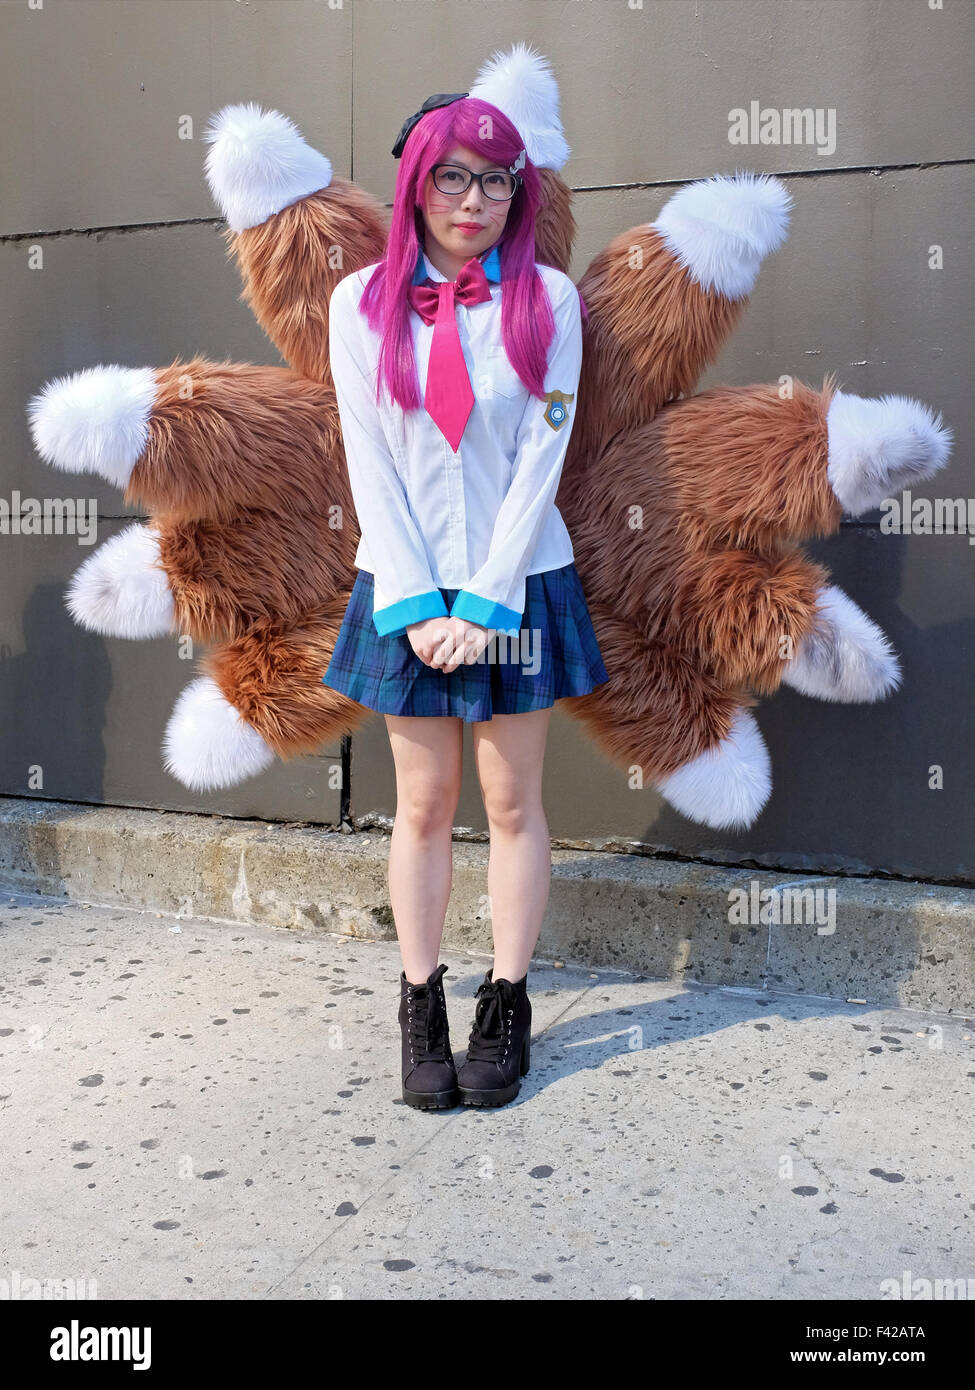 A young attendee of New York Comic Con 2015 dressed like Ahri from the League of Legends. Stock Photo